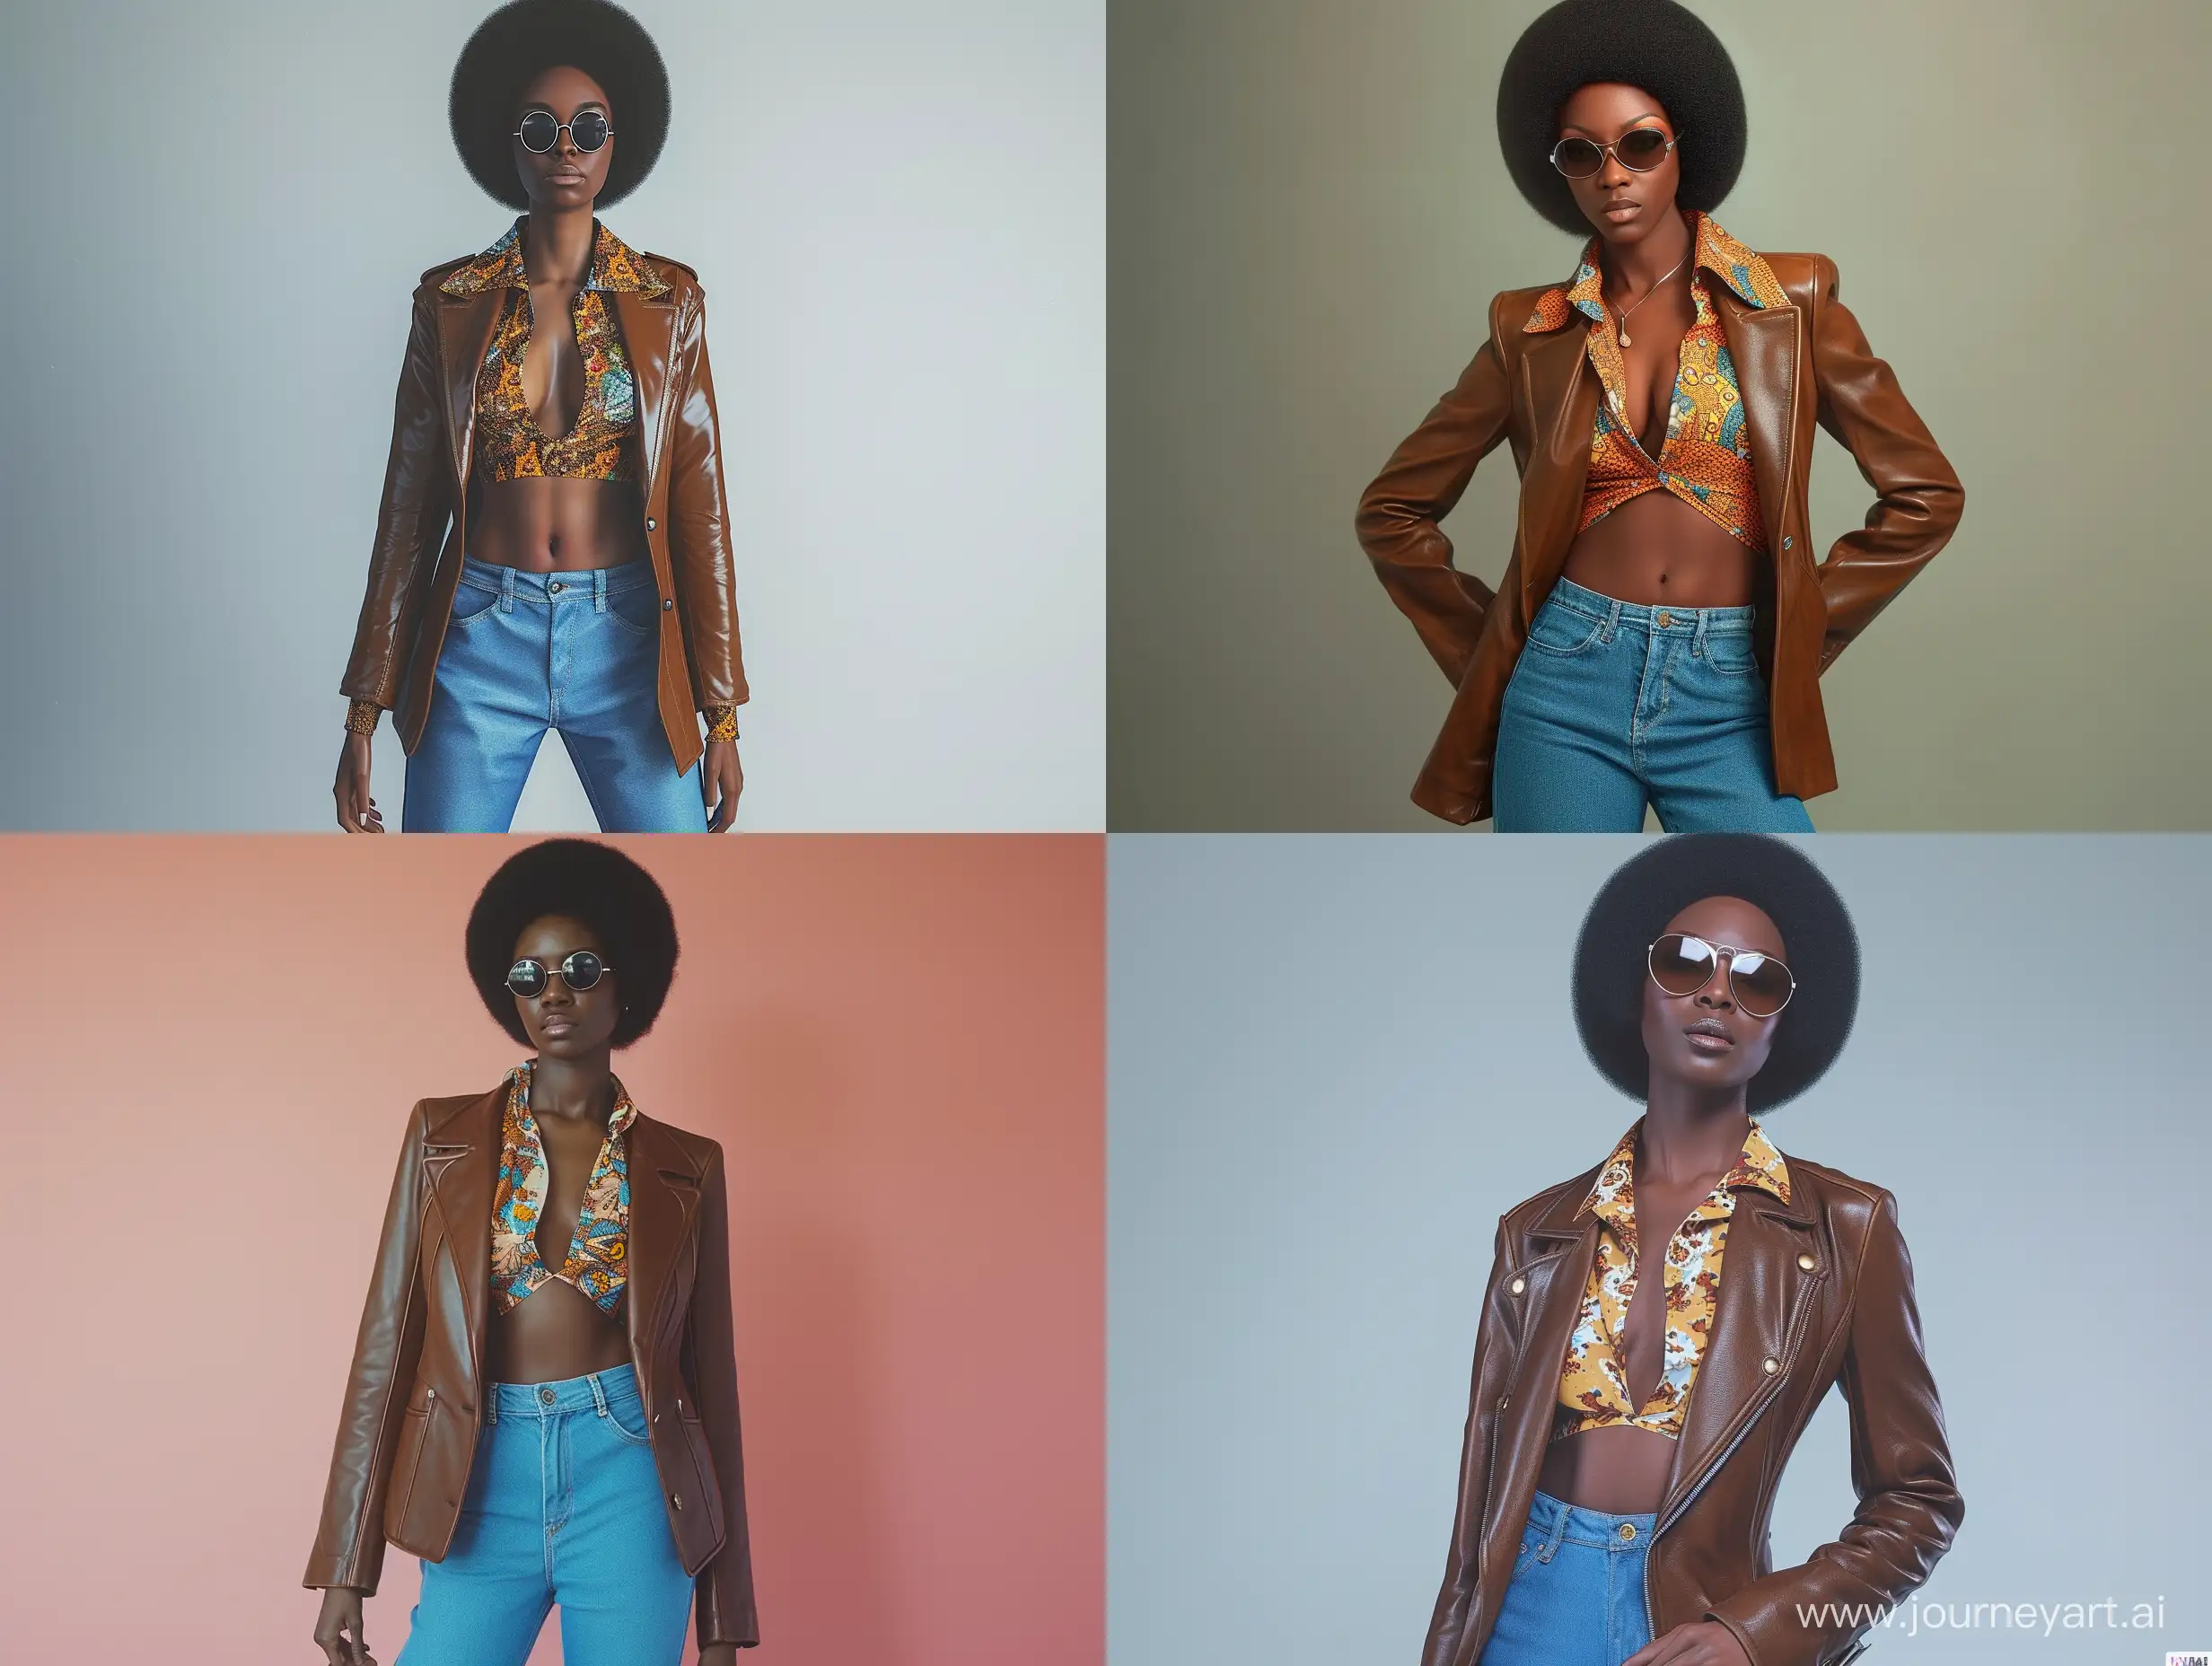 Photorealism, Retro, 1970s, America, Woman, African American, Femininity, Slim Body, Black Hair, Short Afro, Sunglasses, Brown Leather Blazer, Printed Polyester Shirt, Cleavage, Long Sleeves, Blue Flared Jeans